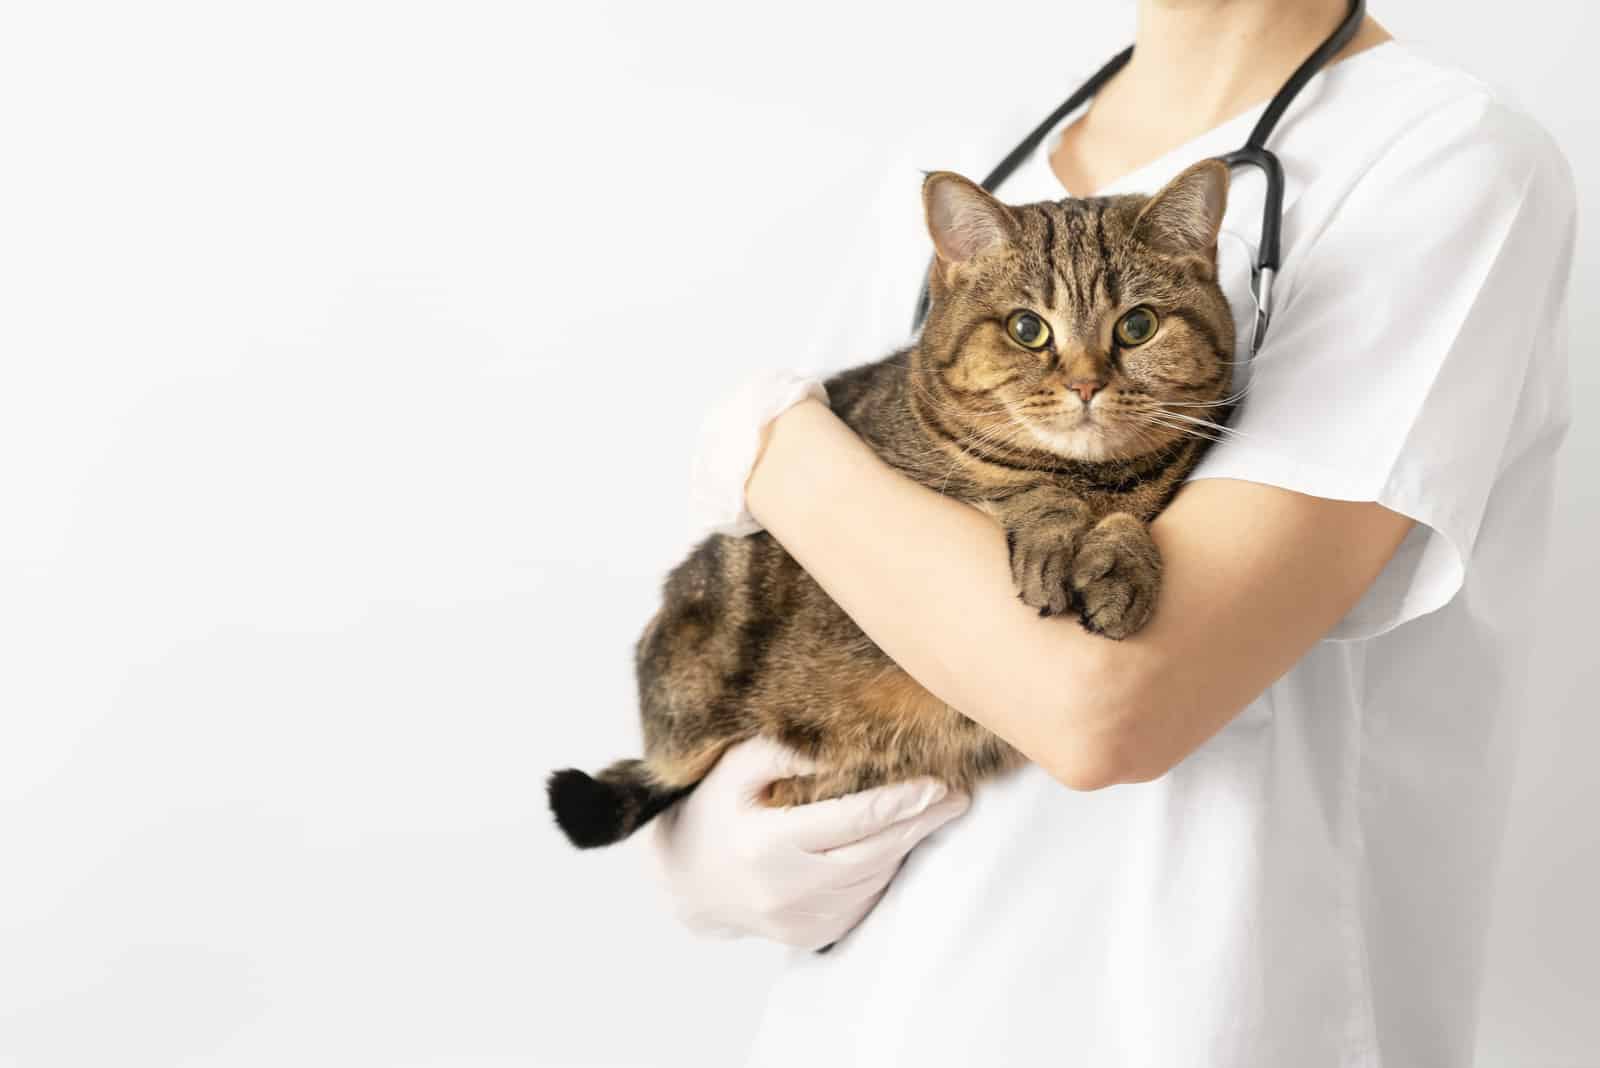 A veterinarian holds a striped cat in his arms